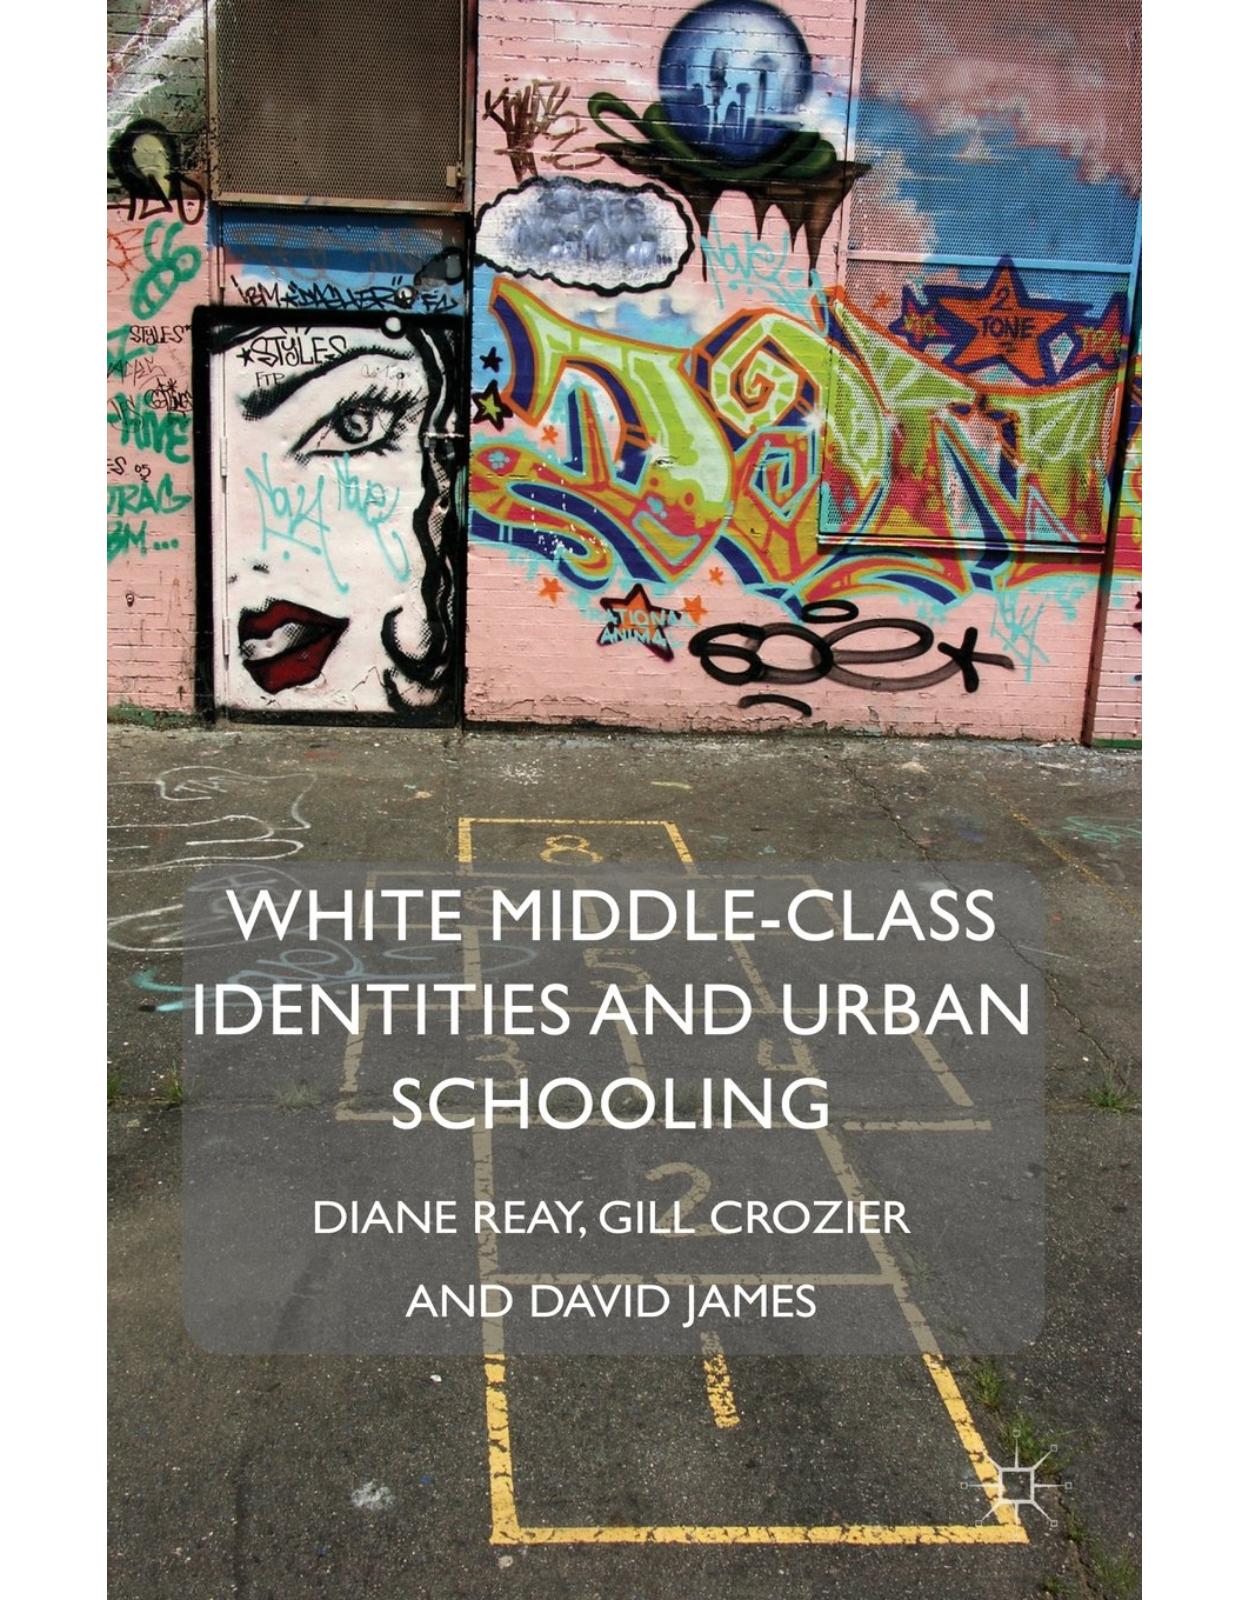 White Middle-Class Identities and Urban Schooling (Identity Studies in the Social Sciences) 